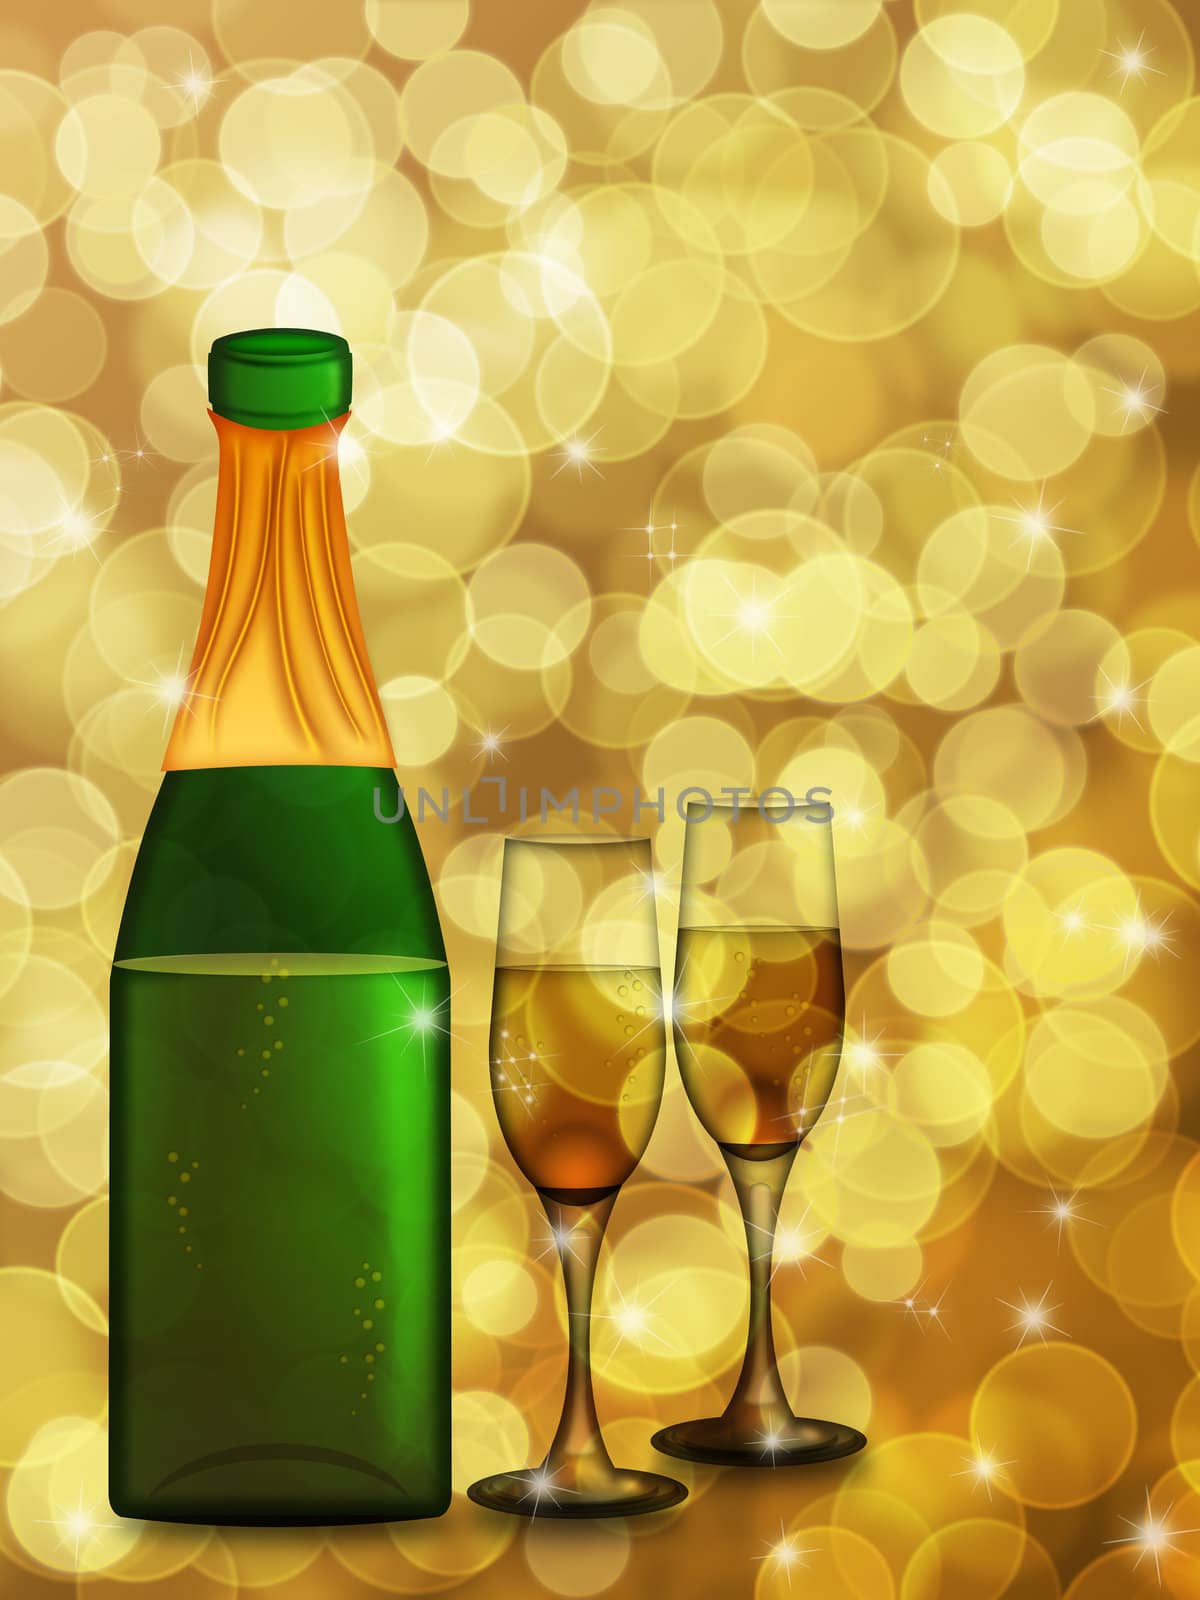 Champagne Bottle with Two Glass Flutes on Blurred Background Illustration